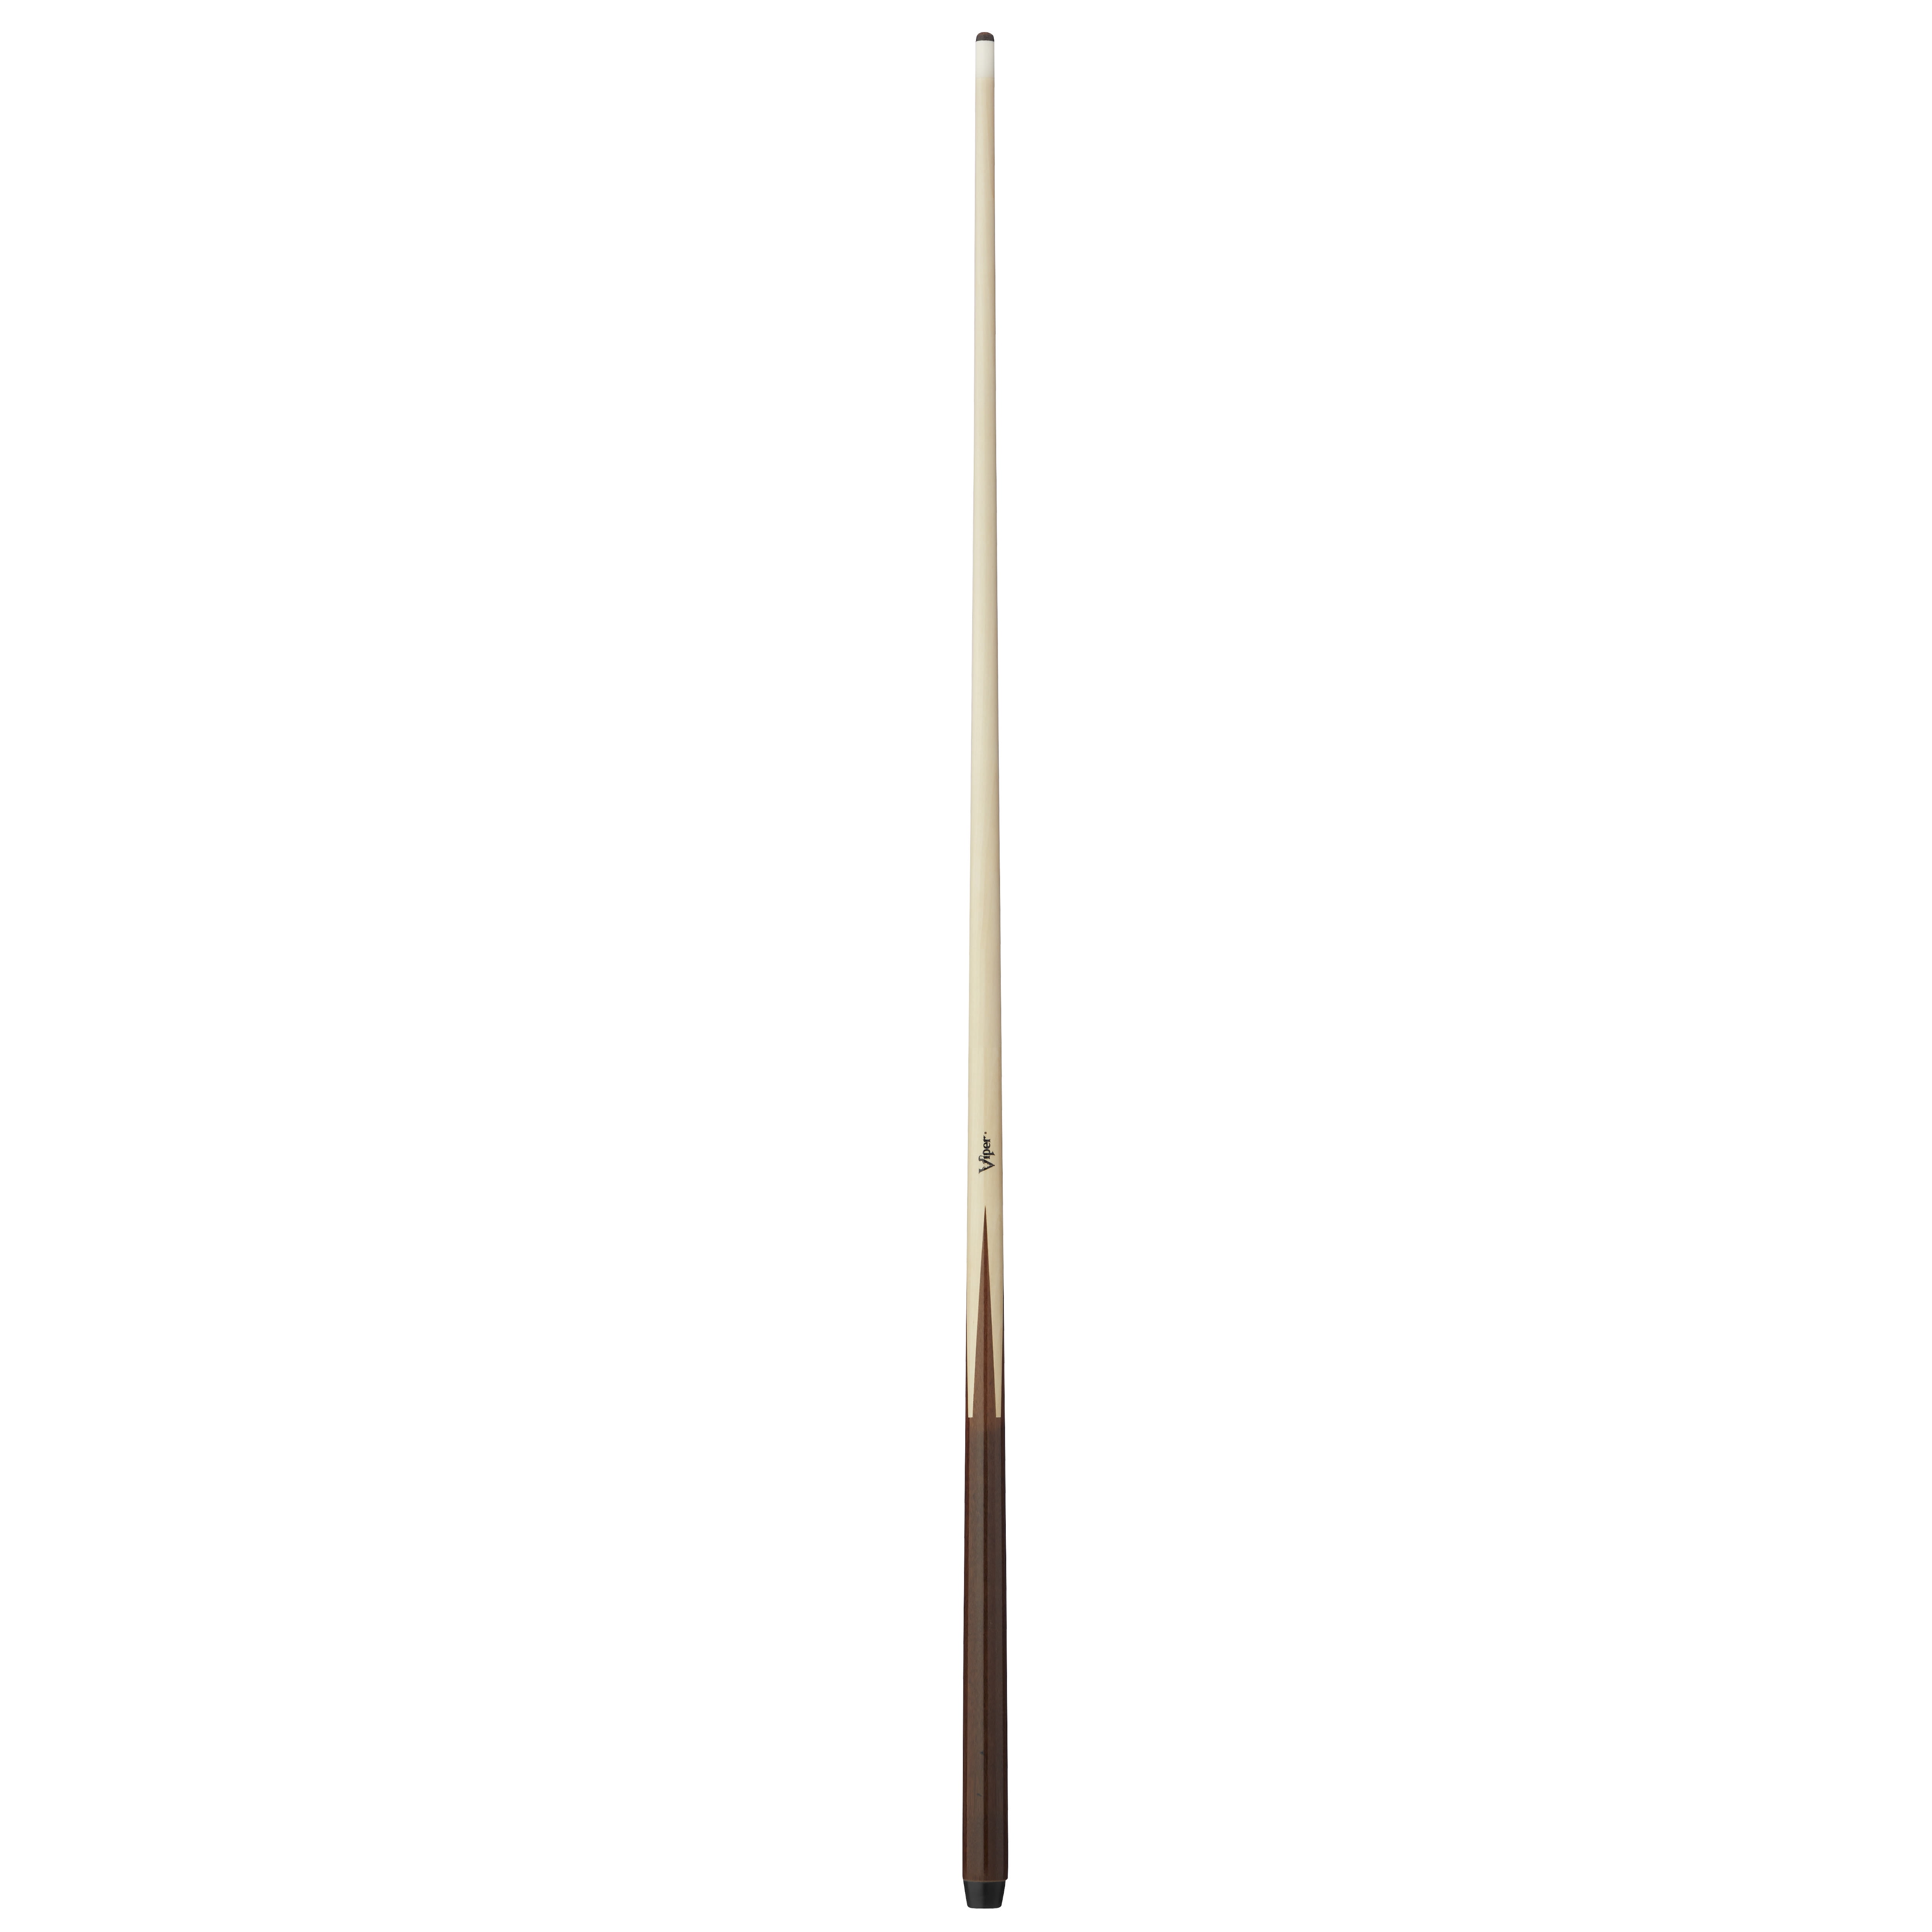 Viper Commercial 1-piece Hardwood Billiard Cue 57-inch 13mm Tip Control Ball for sale online 